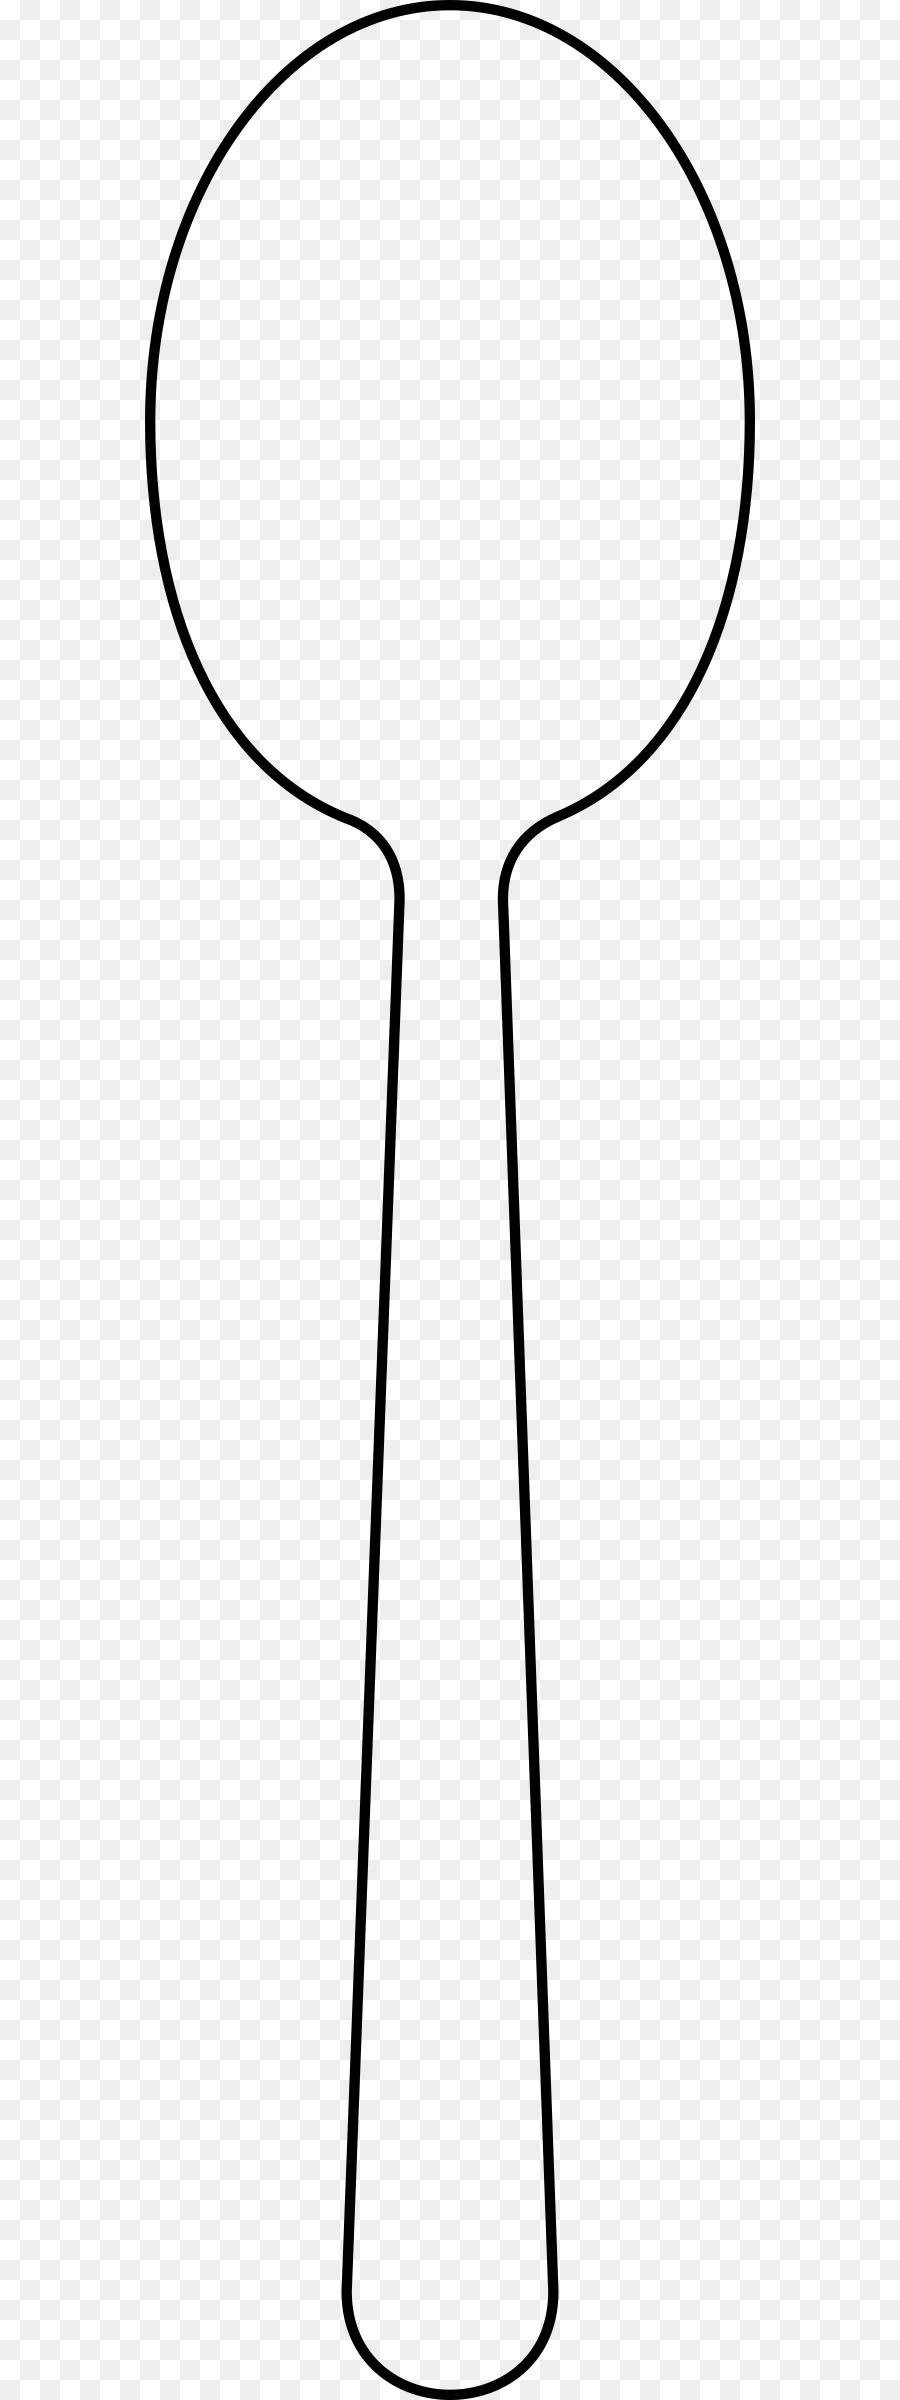 Spoon Clipart Black And White.